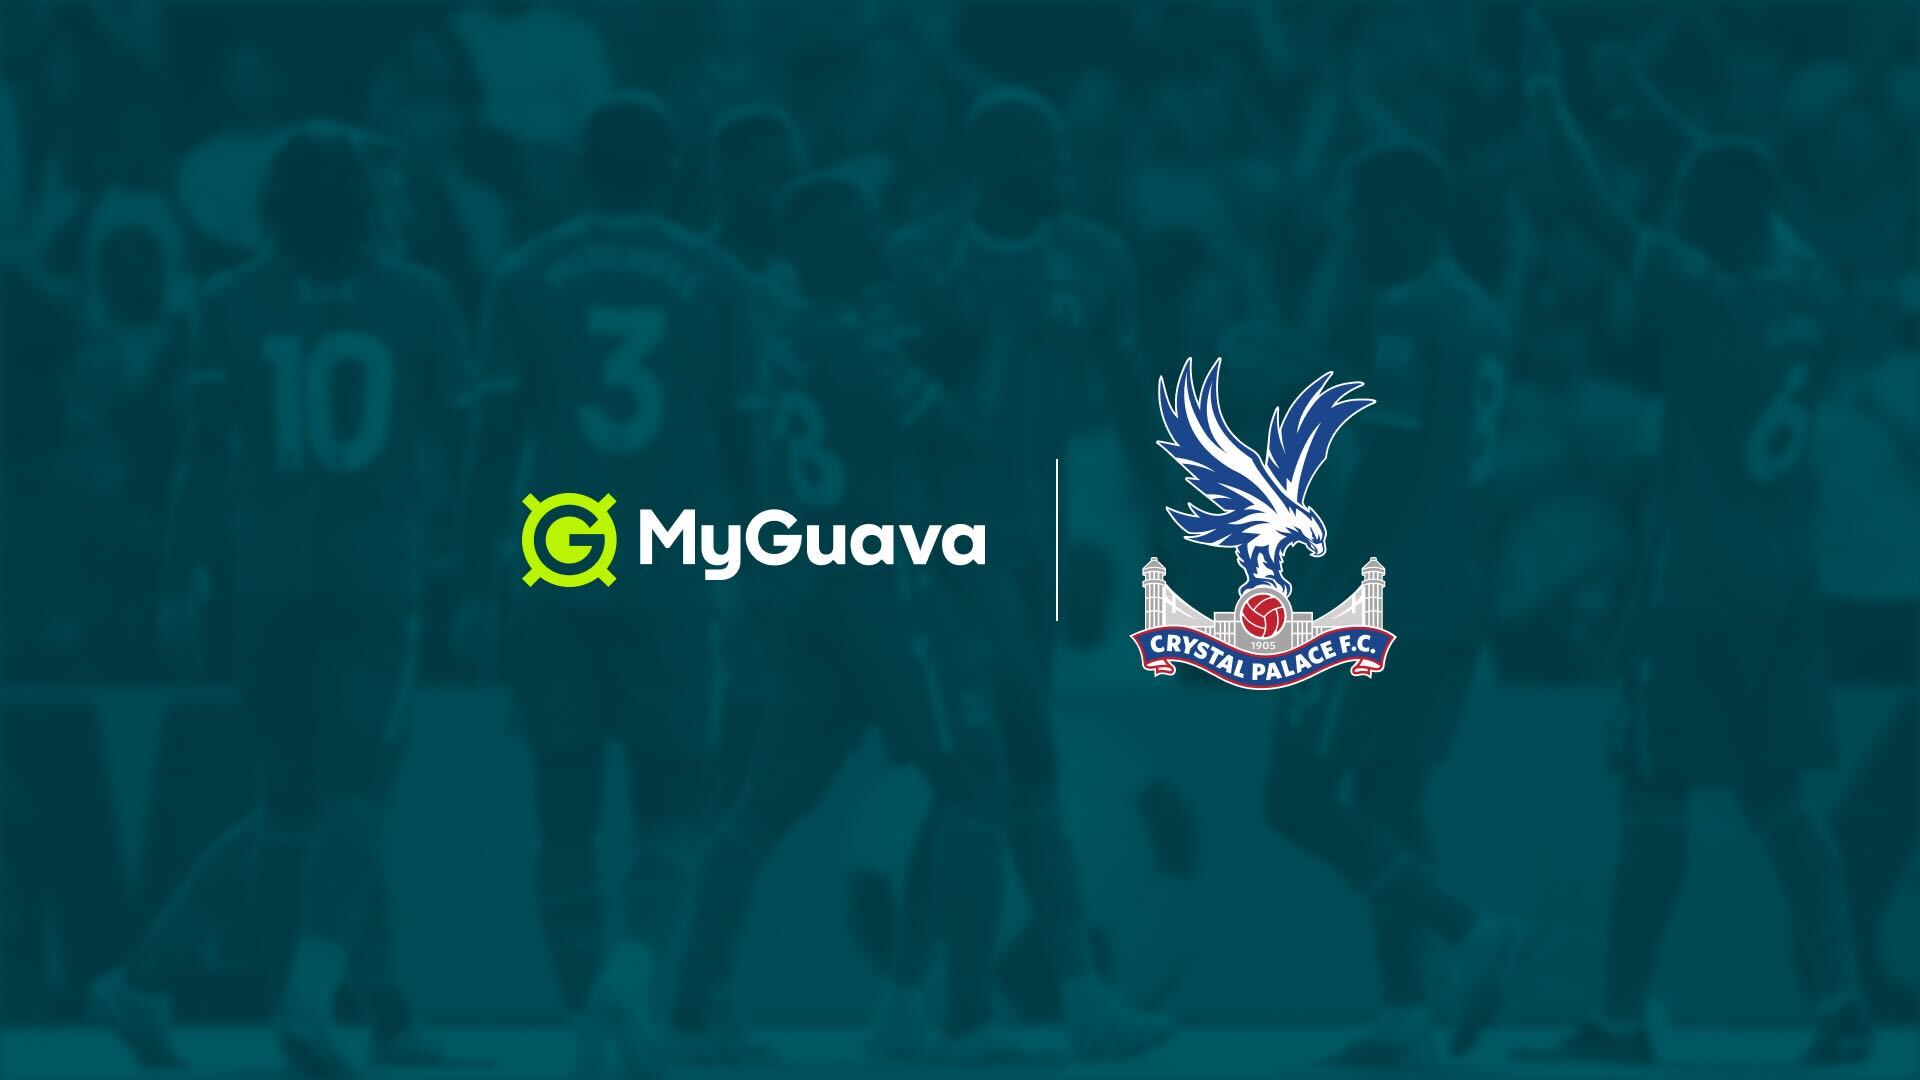 Crystal Palace announced MyGuava as the official affinity card partner